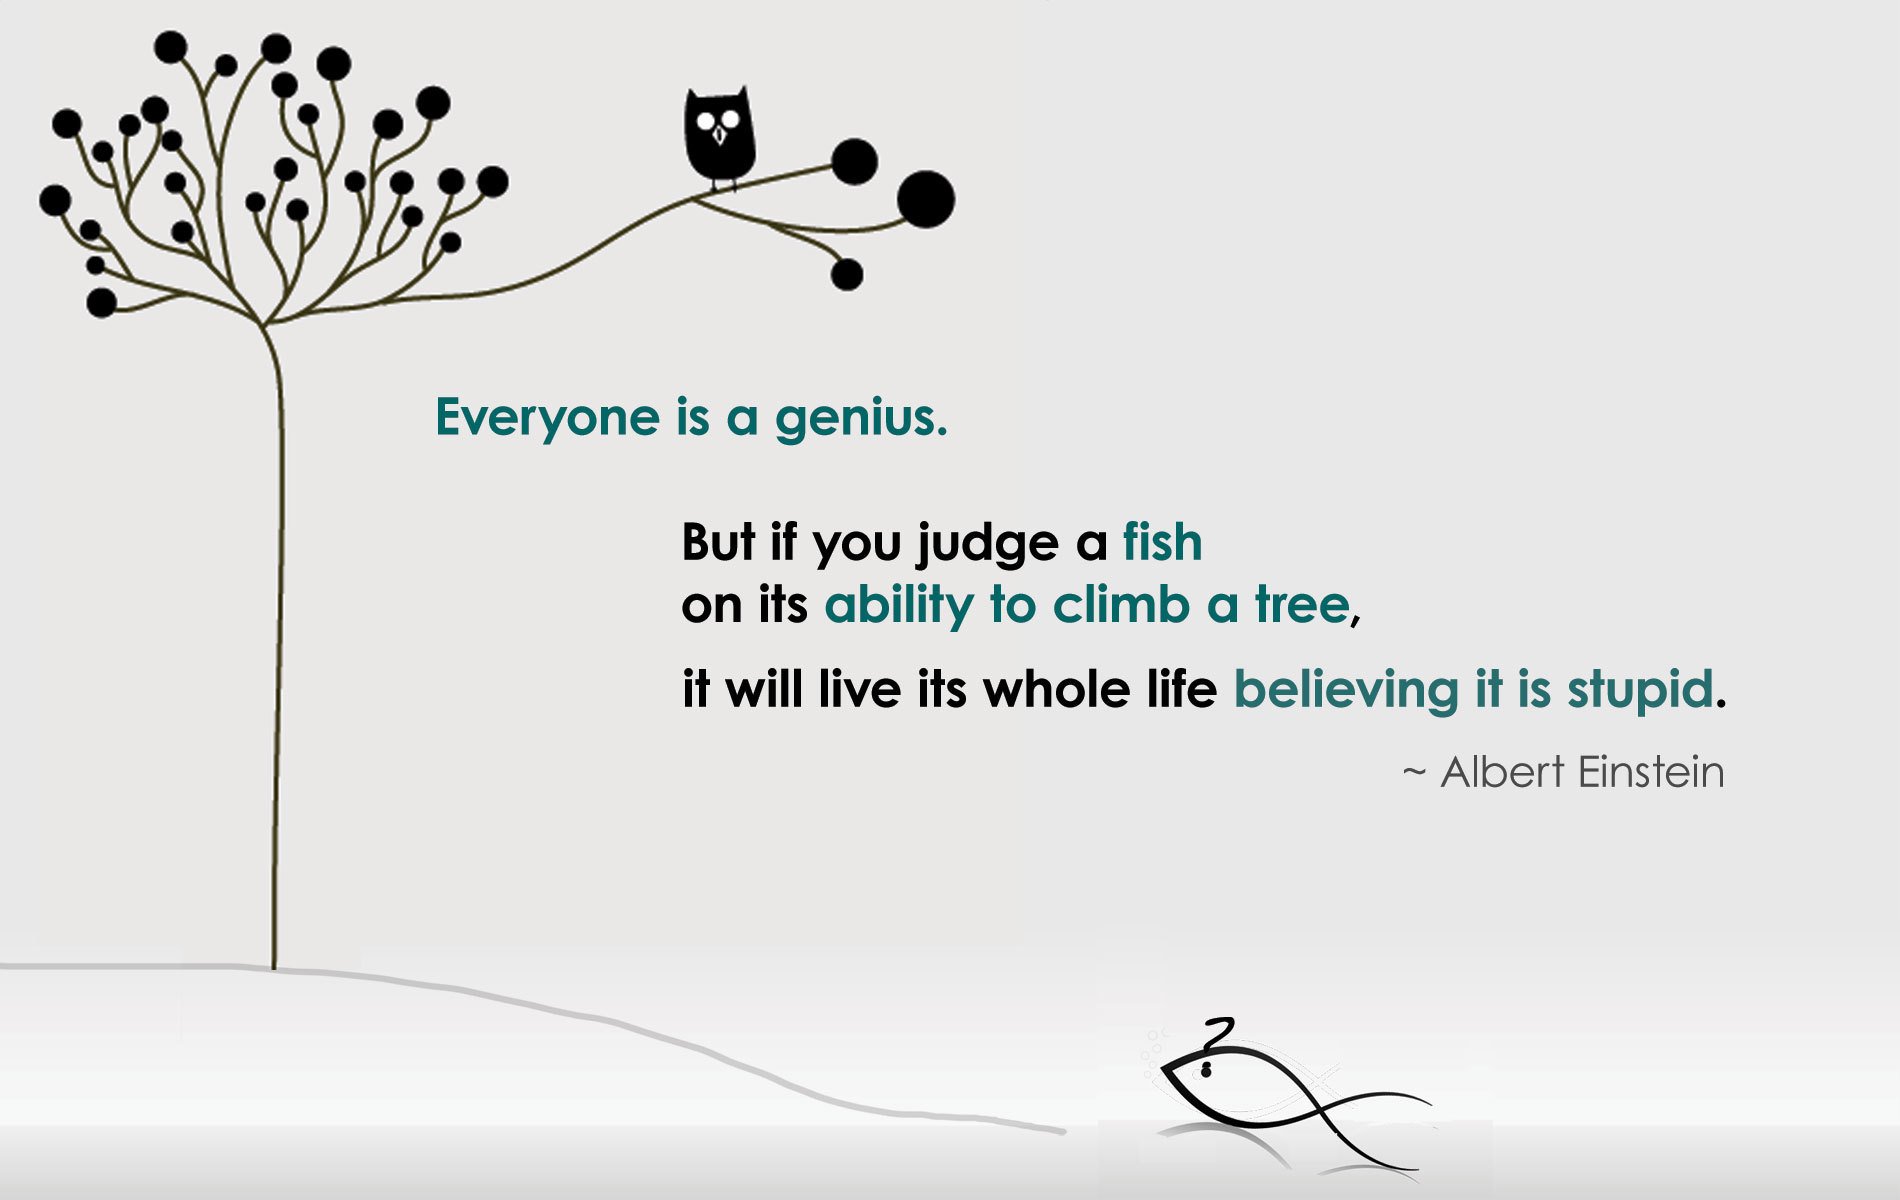 A stylized graphic featuring the Albert Einsten quote: "Everyone is a genius. But if you judge a fish on its ability to climb a tree, it will live its whole life believing it is stupid." A line-art fish gazes wistfully at an owl sitting atop a tree.